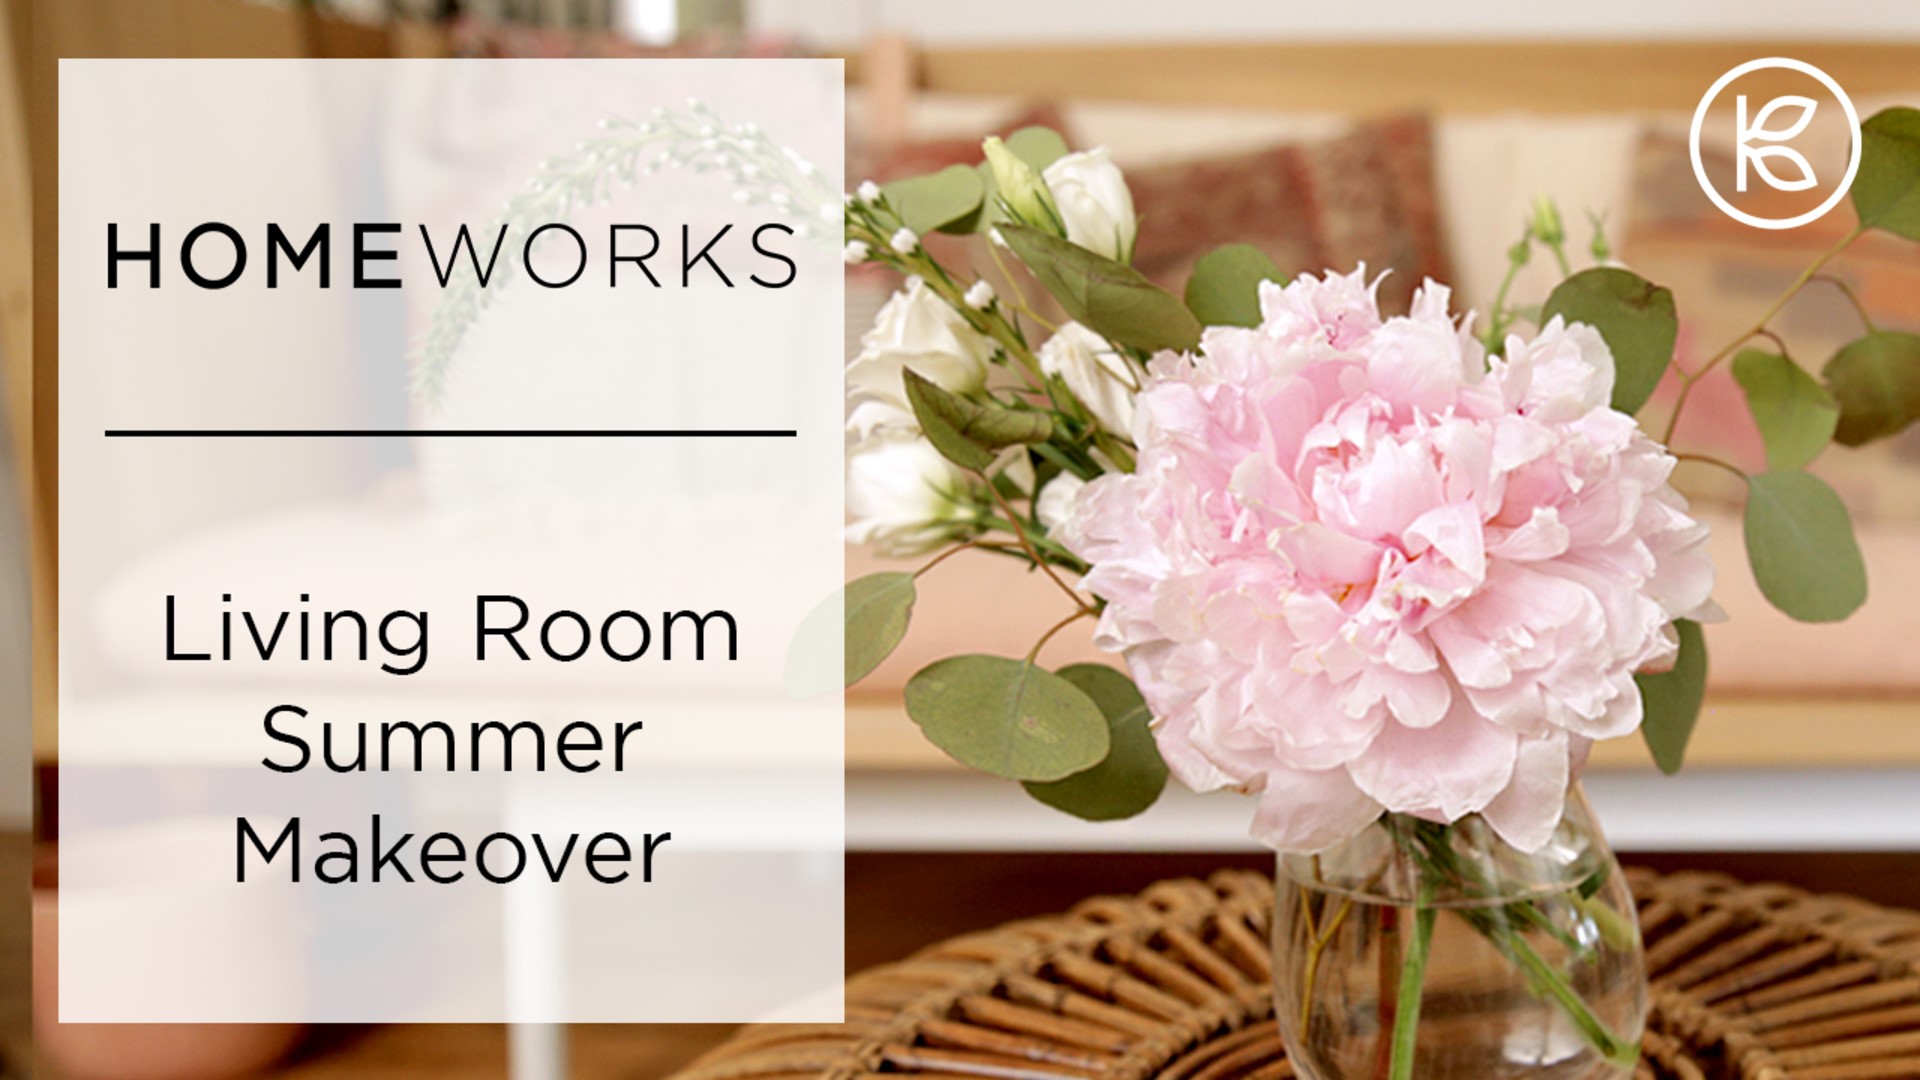 Give your living room a summer refresh with these quick and easy decorating tips! 